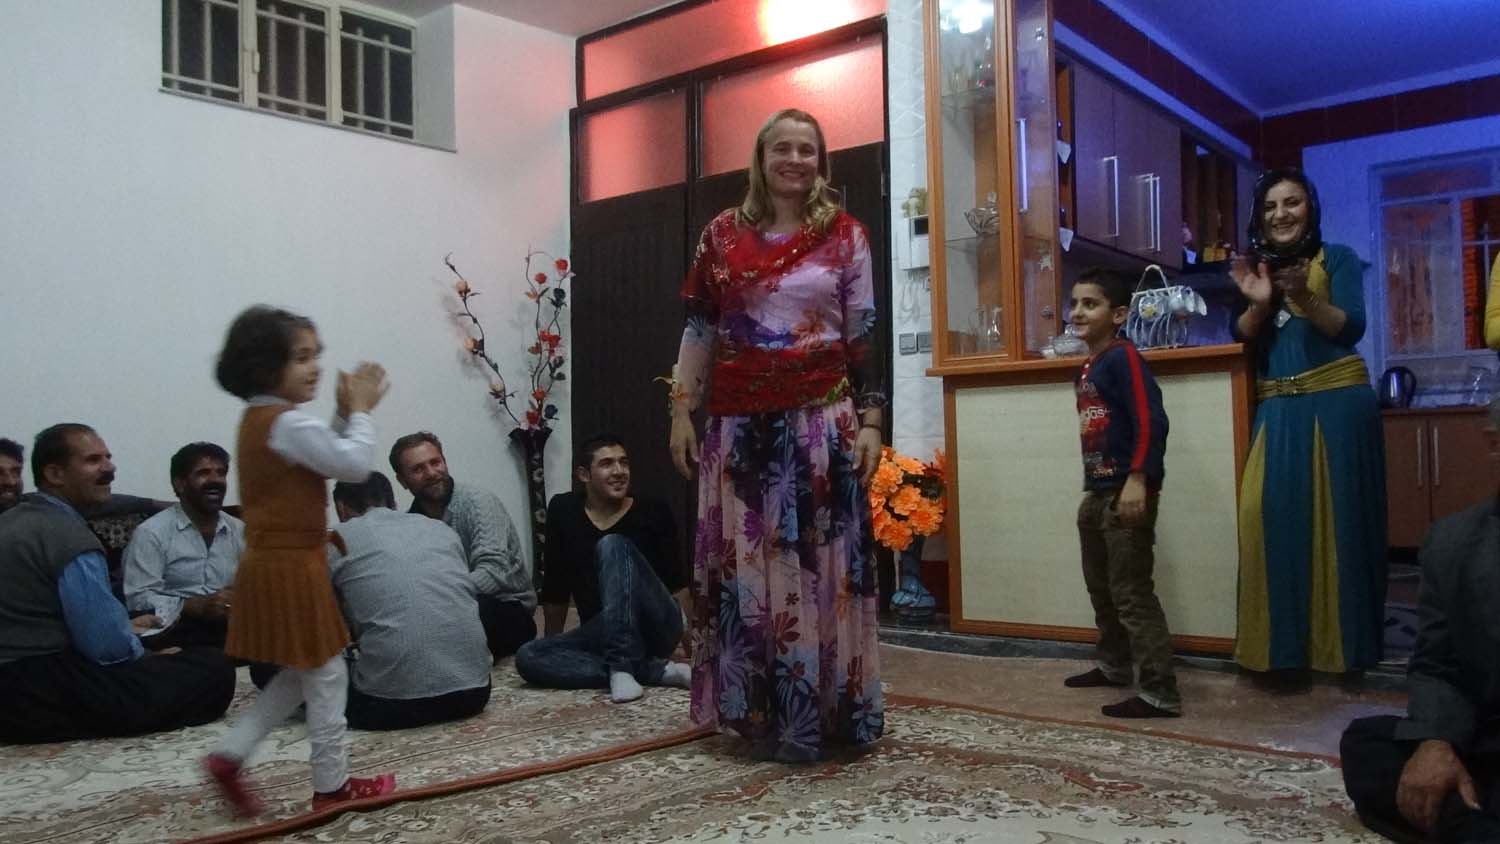 Jude is dressed in typical Kurdish dress after we join this family for dinner